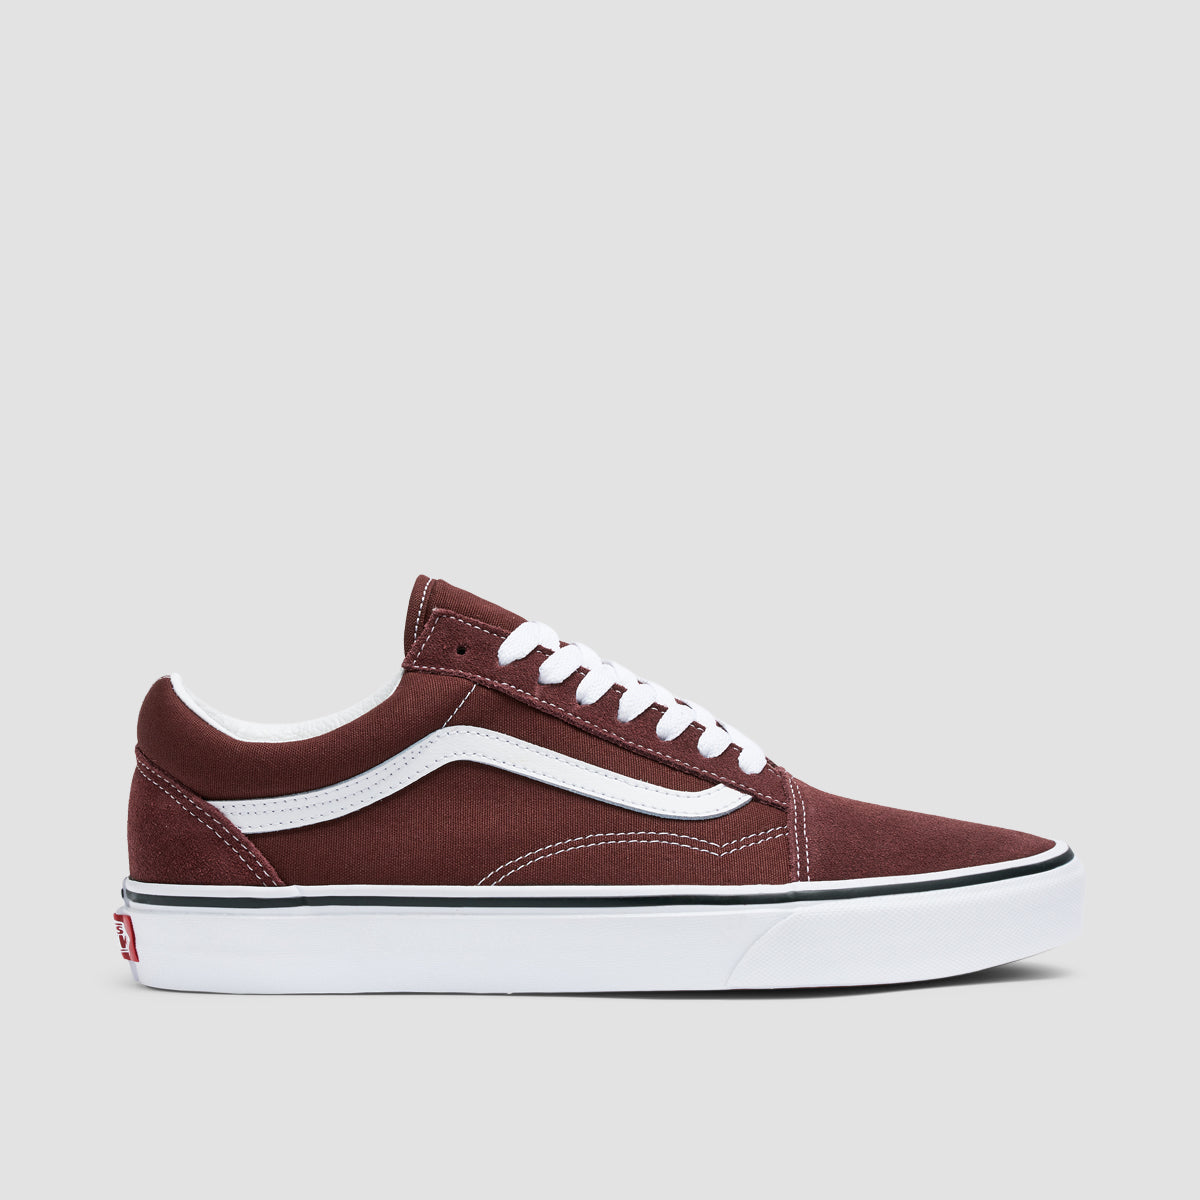 Vans Old Skool Shoes - Colour Theory Bitter Chocolate